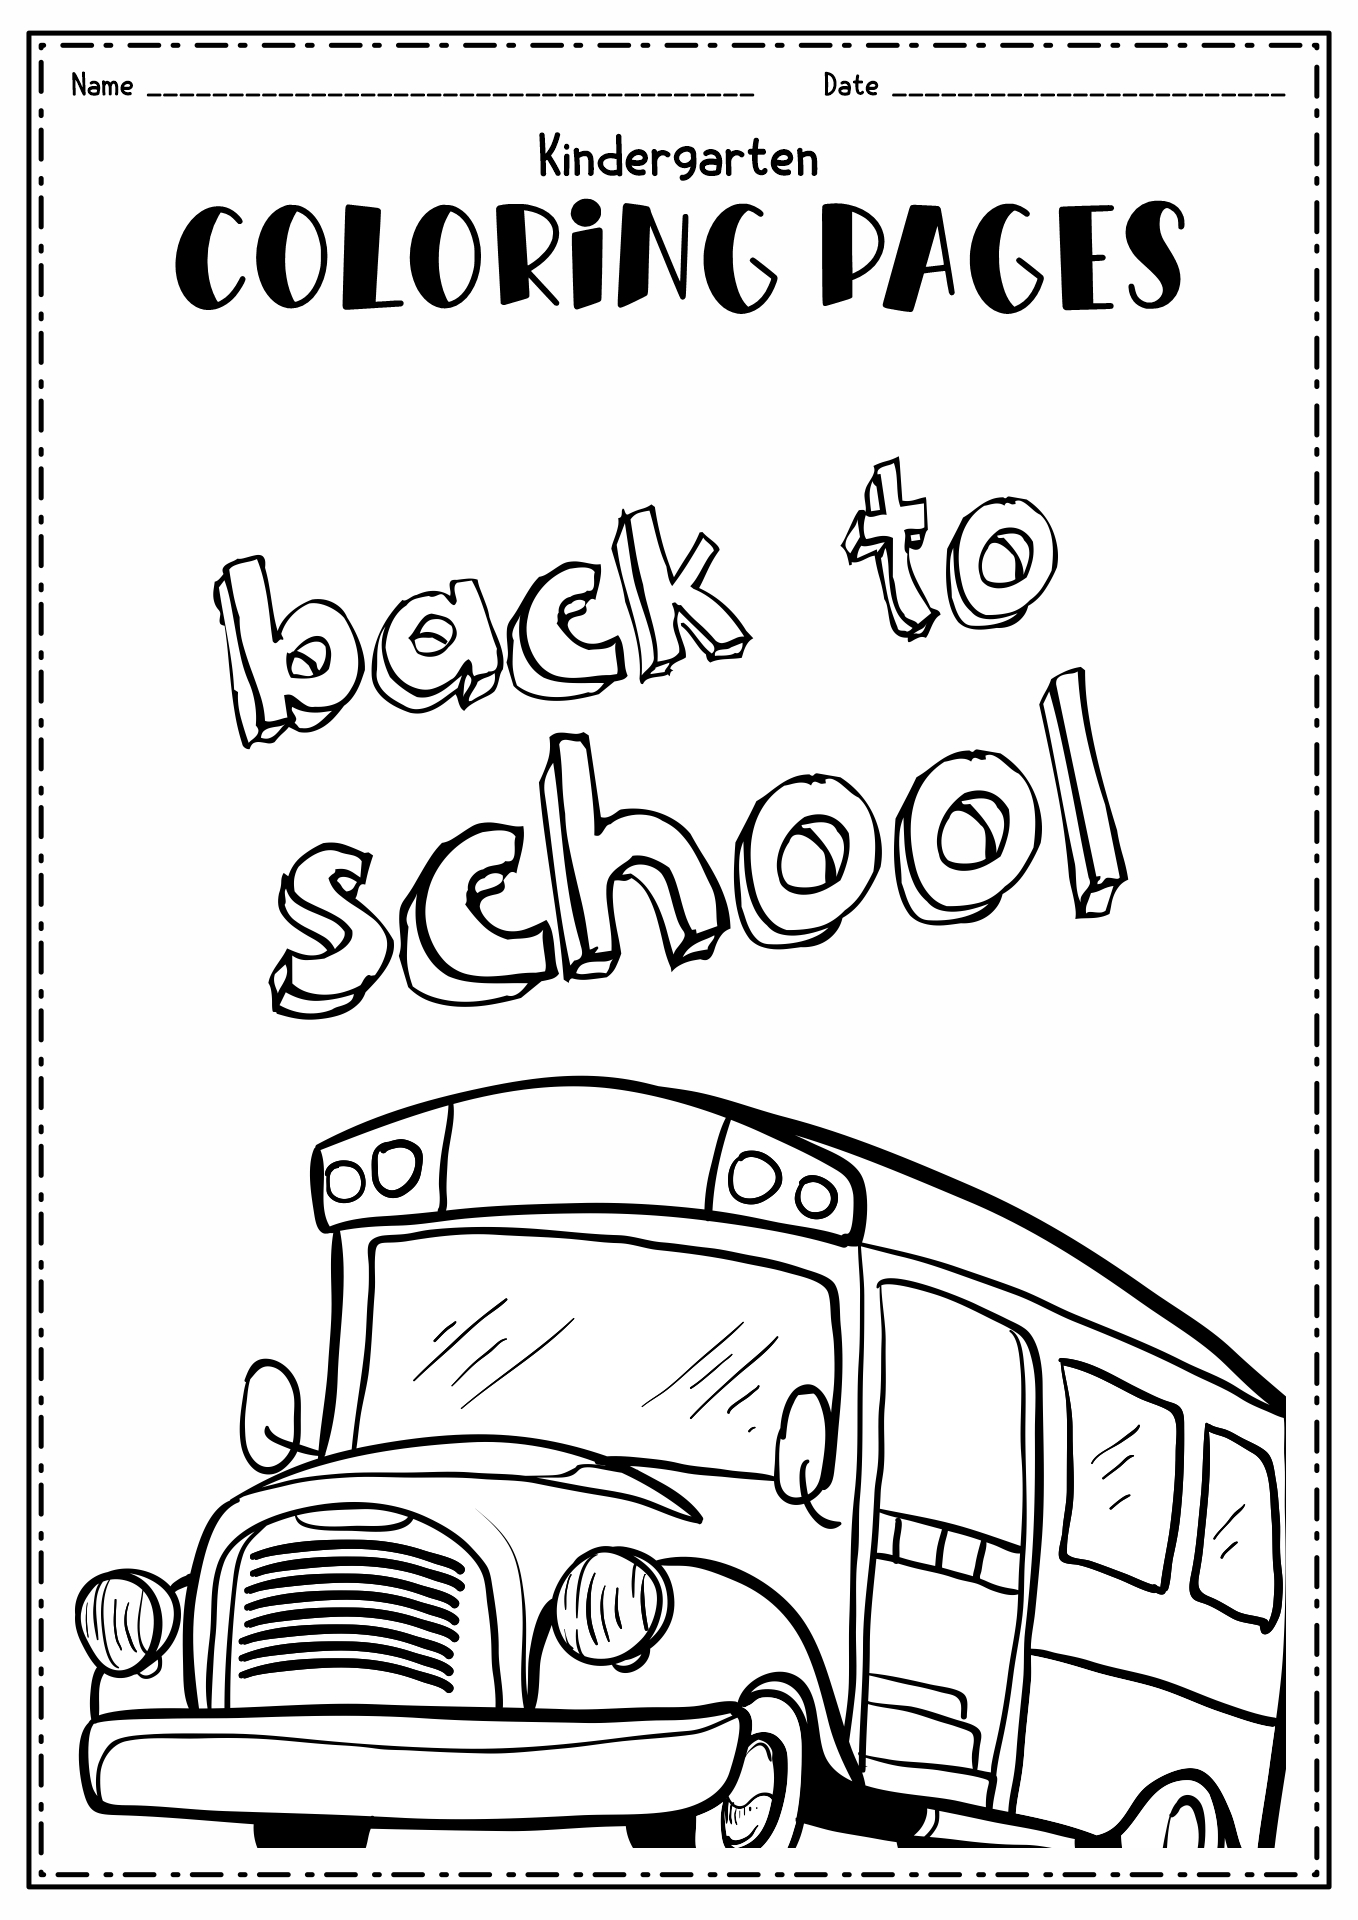 Back to School Coloring Pages Printable Image